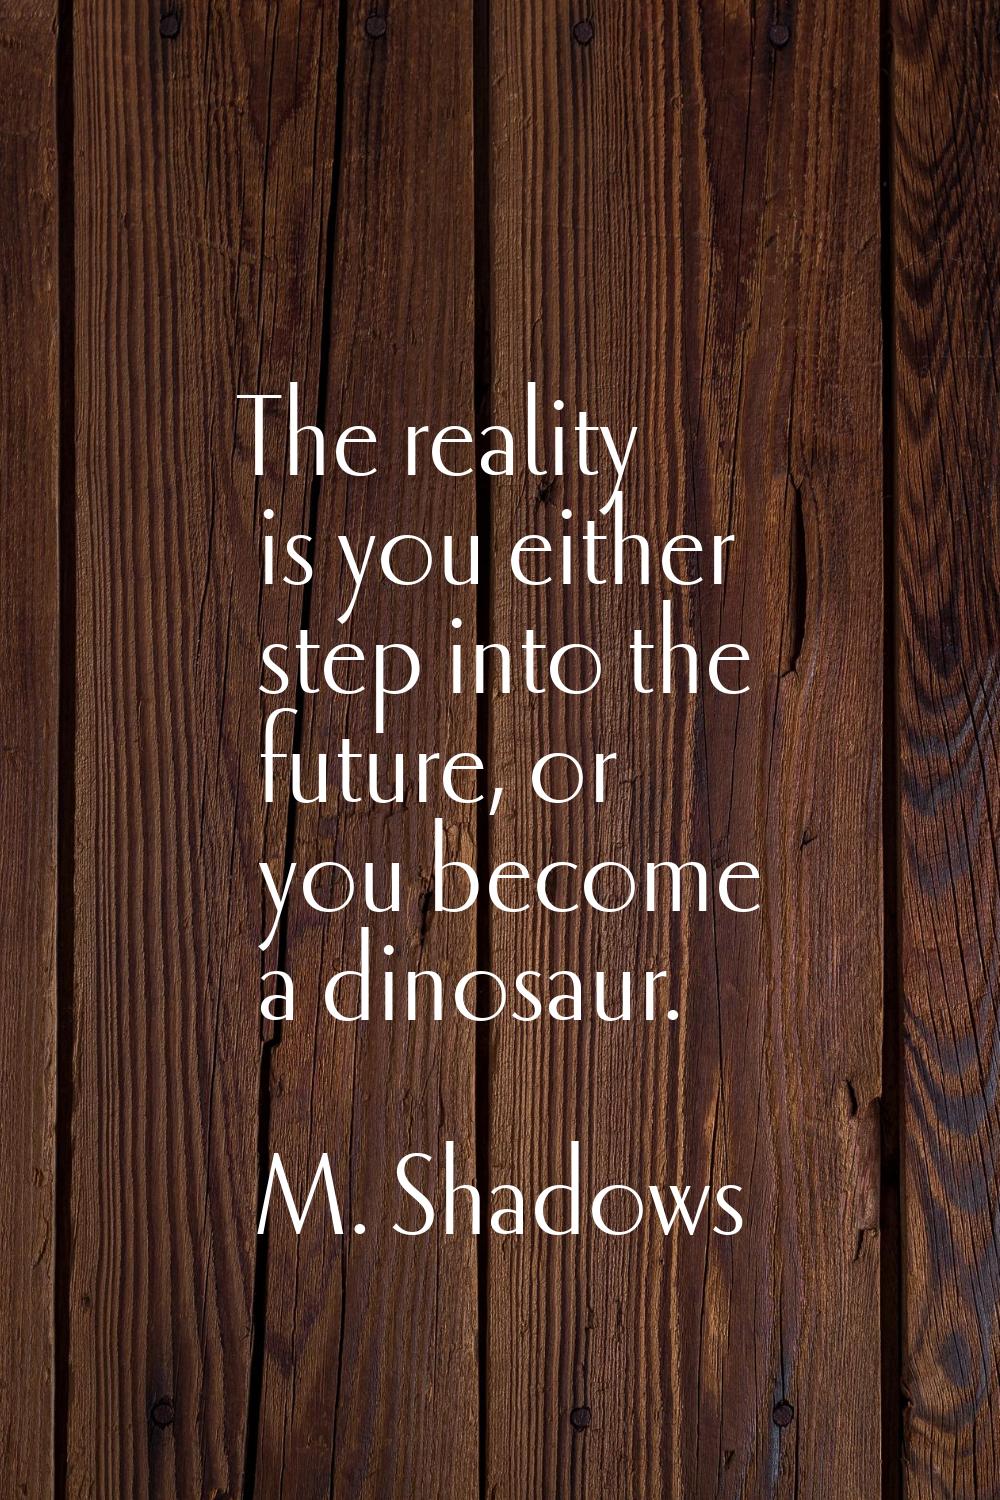 The reality is you either step into the future, or you become a dinosaur.